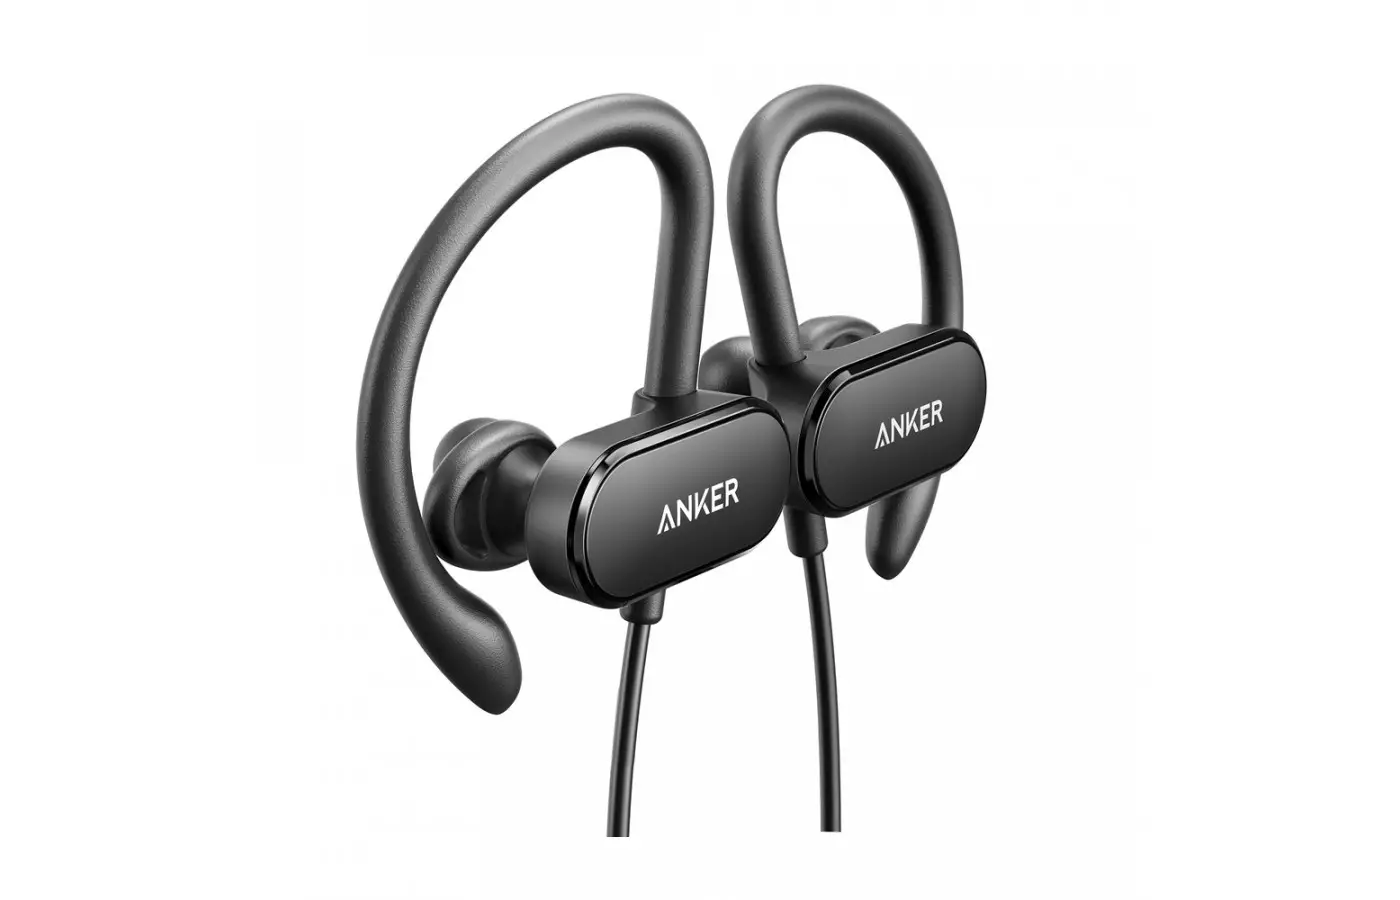 The Anker SoundBuds Curve offers a clear sound and noise cancelling features for a more enjoyable experience.